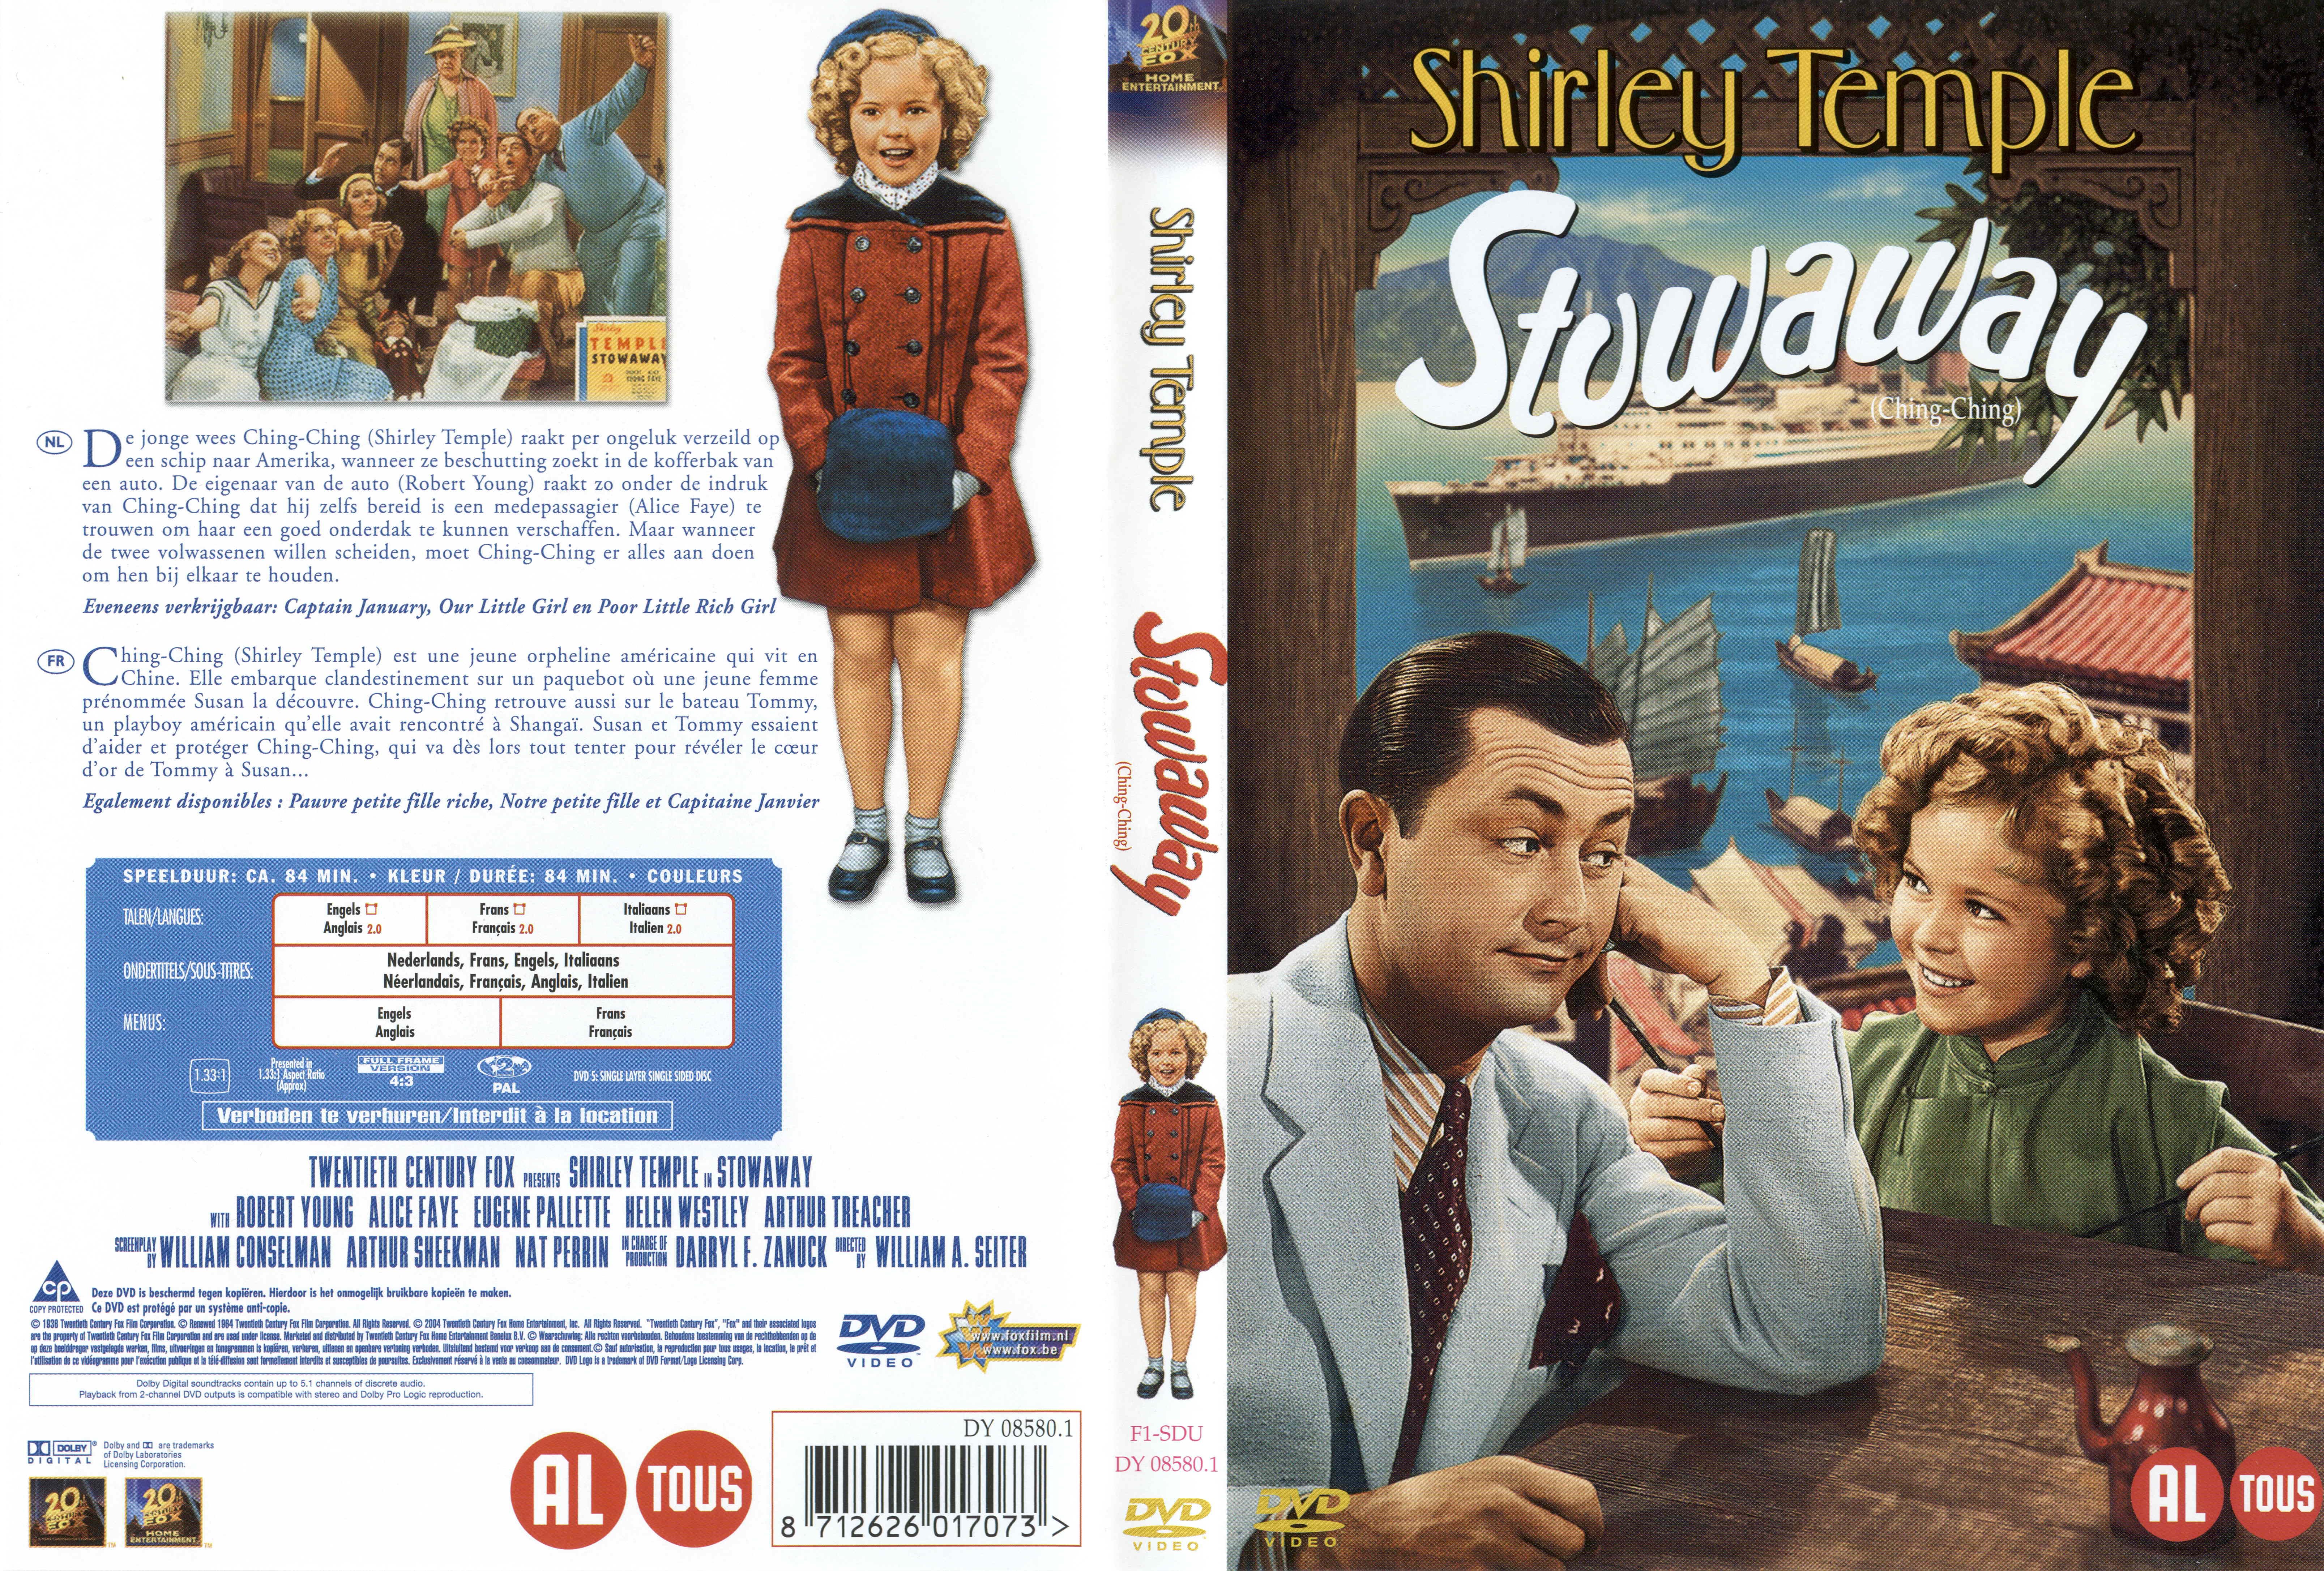 Jaquette DVD Ching-Ching - Stowaway